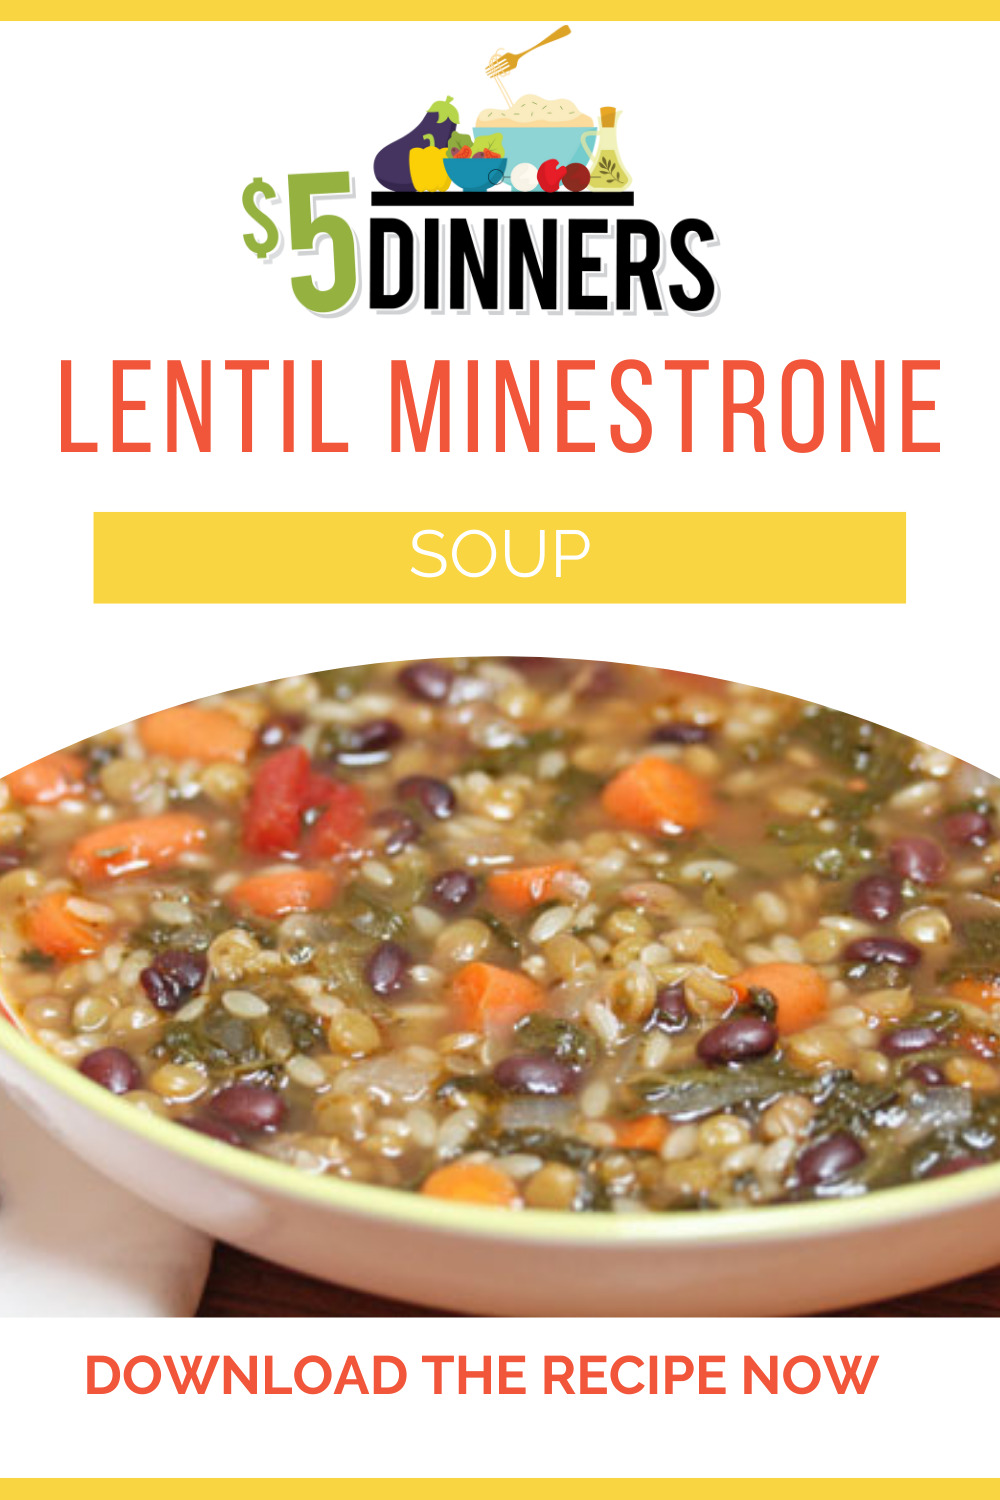 Lentil Minestrone Soup - $5 Dinners | Budget Recipes, Meal Plans ...